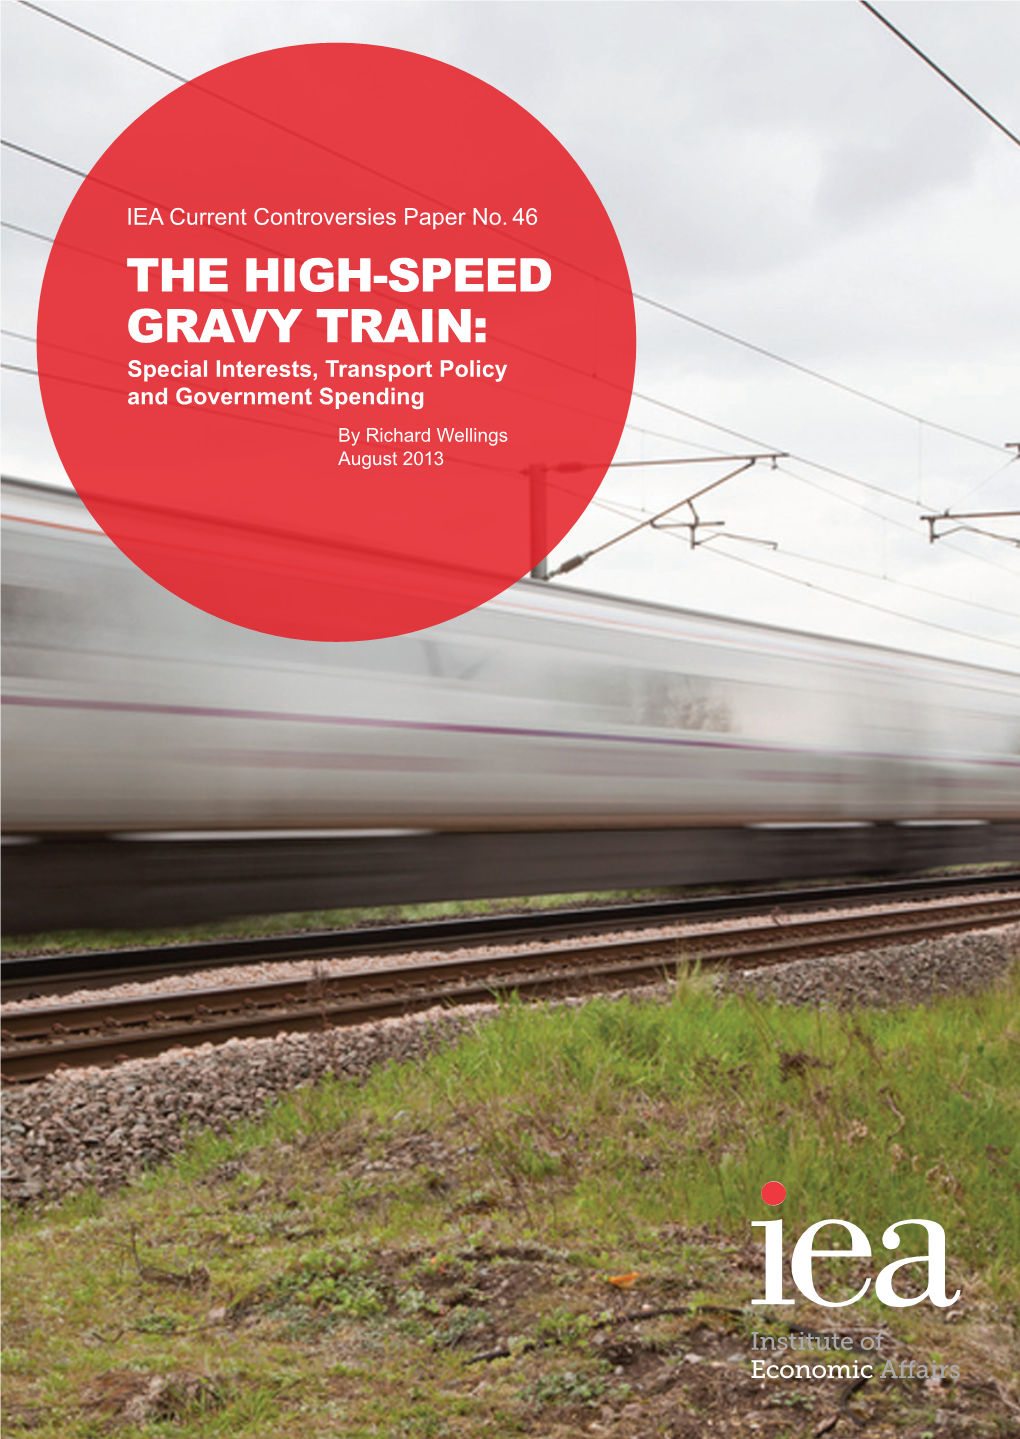 The High-Speed Gravy Train: Special Interests, Transport Policy and Government Spending by Richard Wellings August 2013